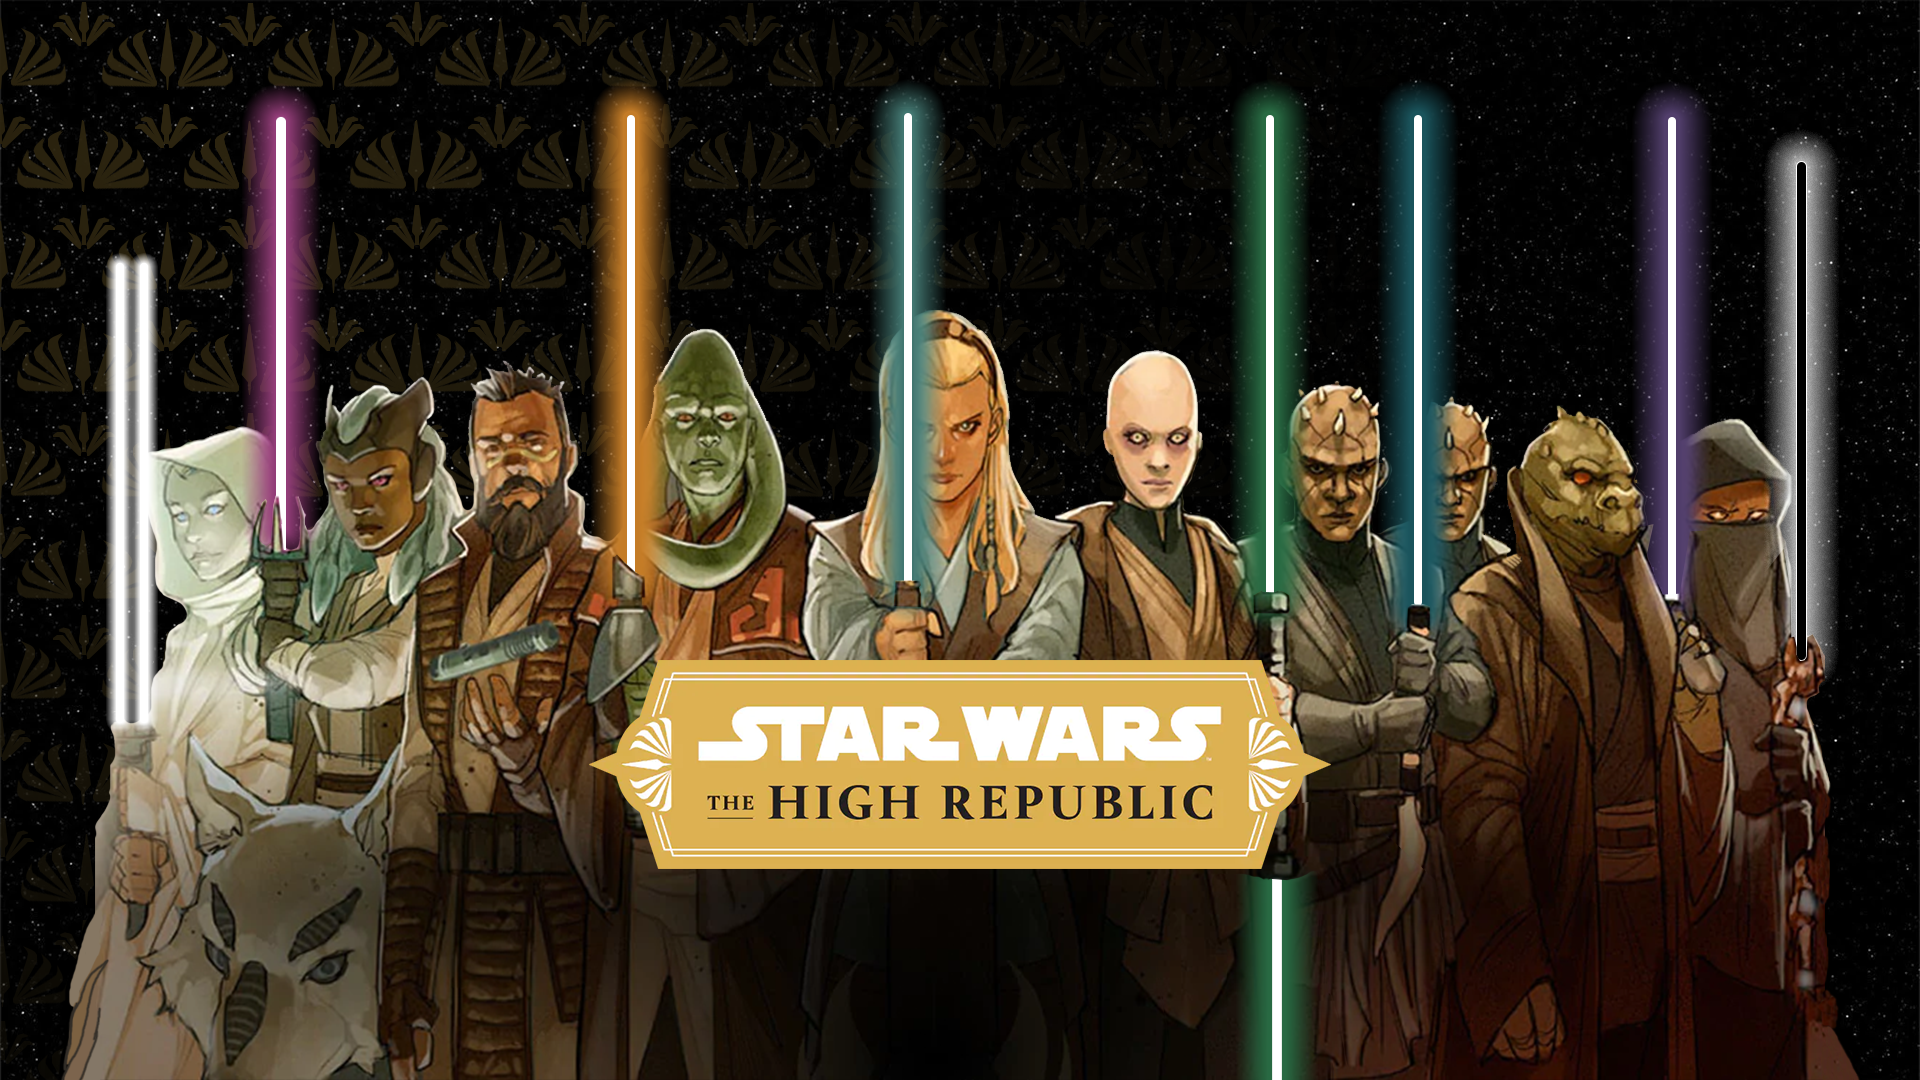 Star Wars The High Republic is starting early next year